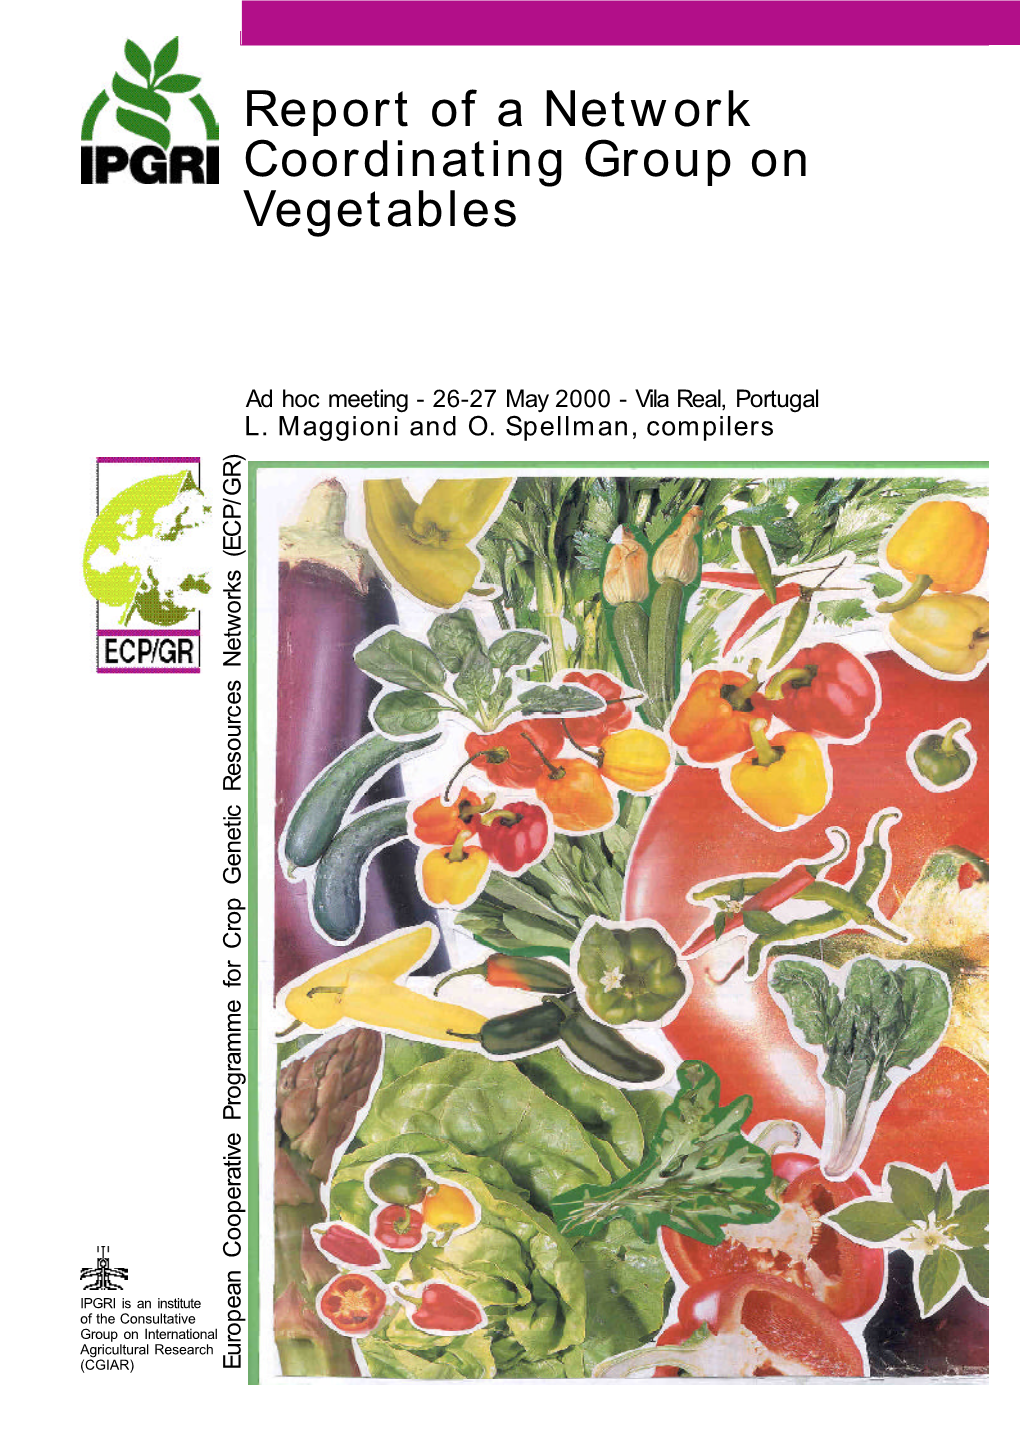 Report of a Network Coordinating Group on Vegetables